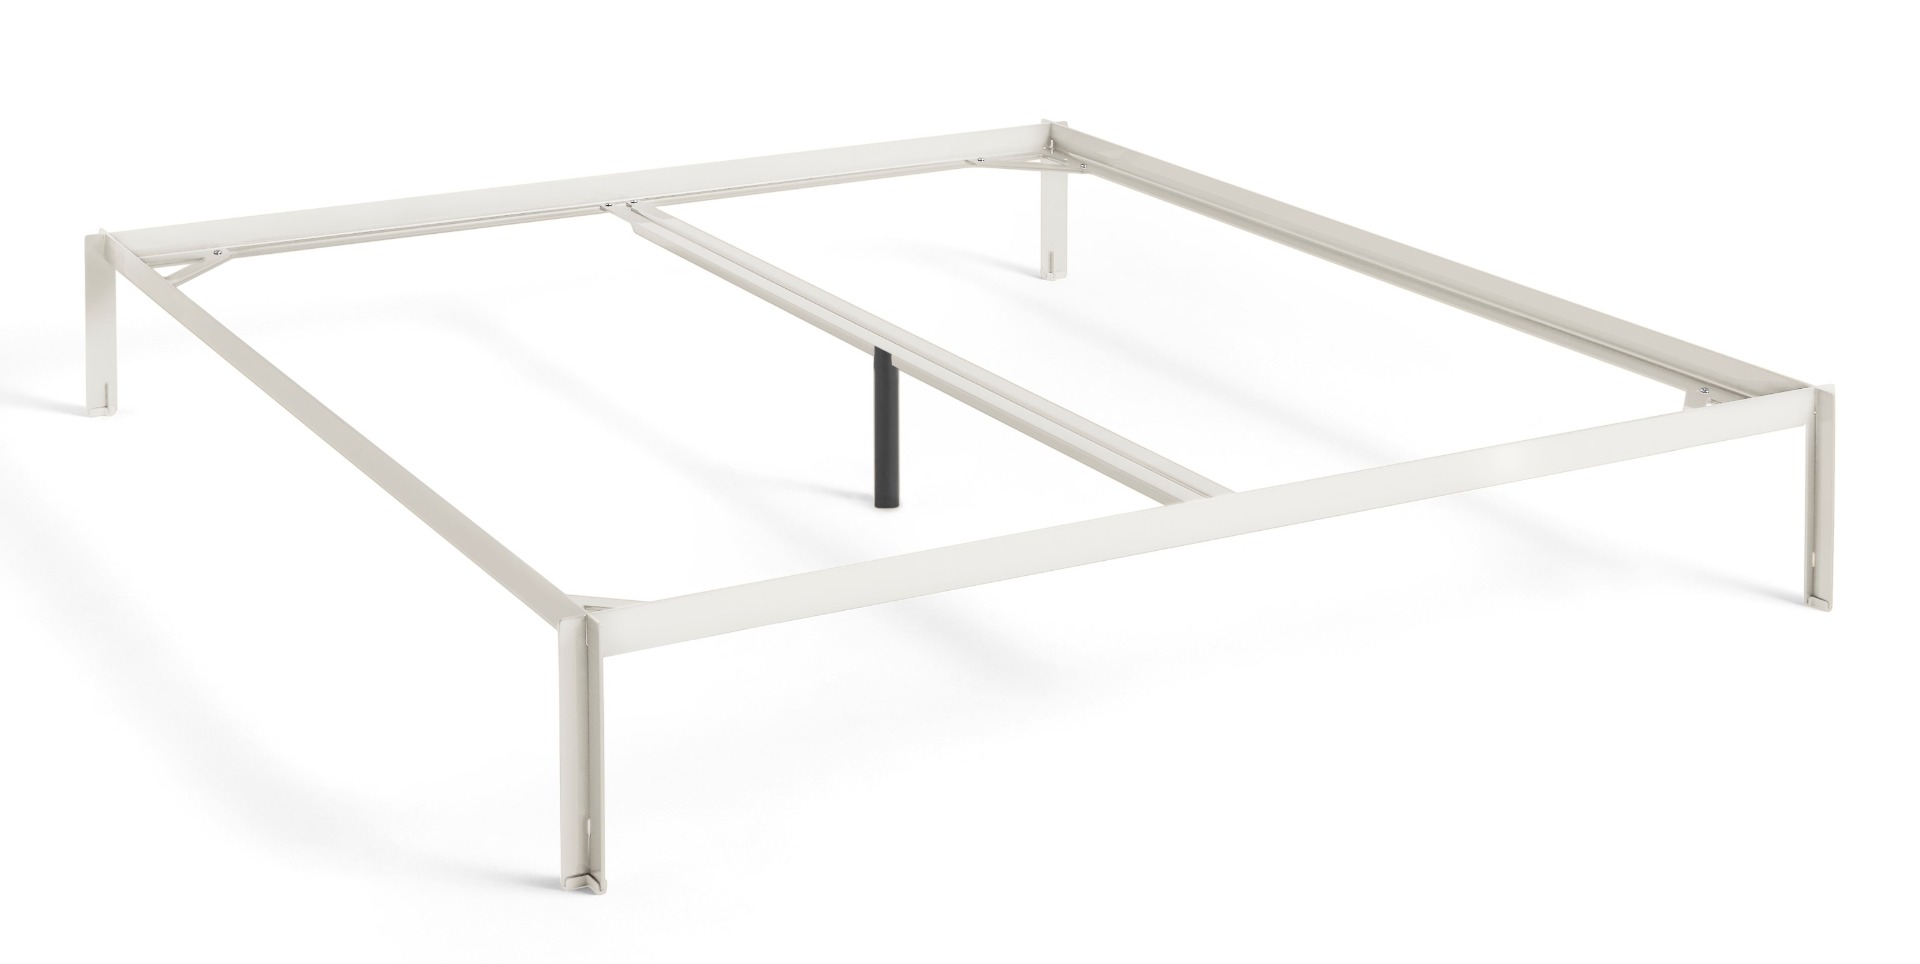 https://www.fundesign.nl/media/catalog/product/a/b/ab073-b561-aa56_connect_bed_w180xl200xh30_with_support_bar_white.jpg